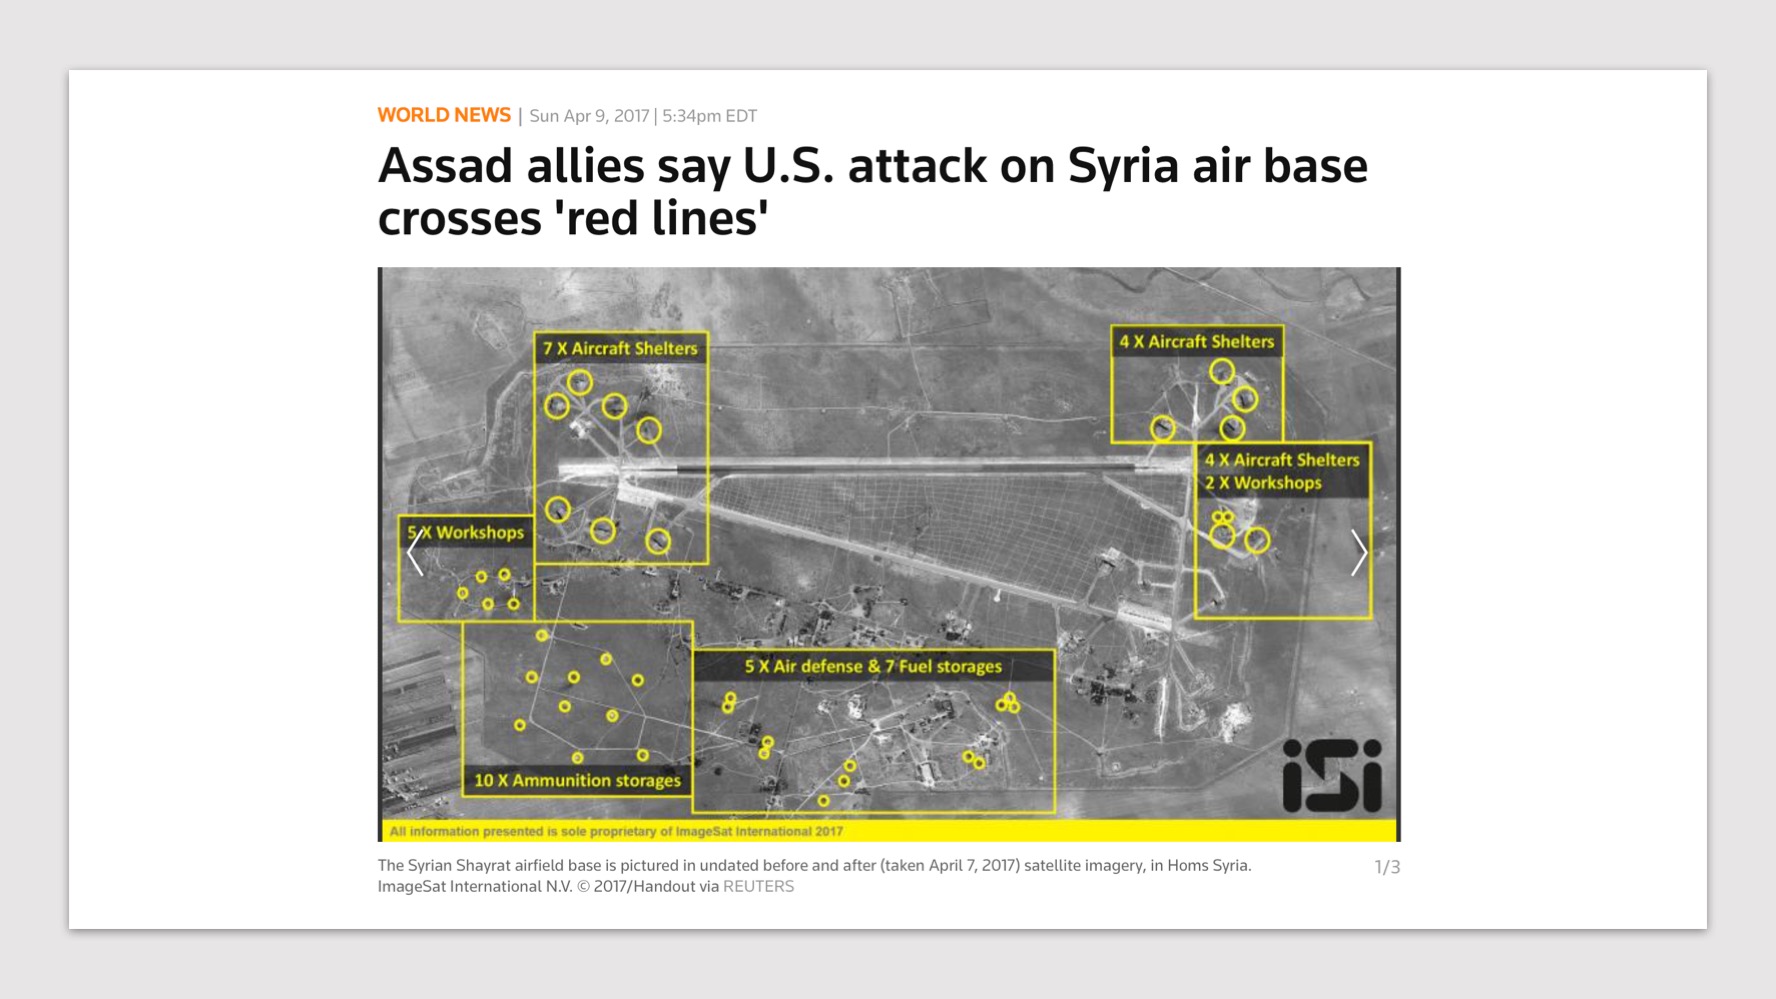 World News - US Missile Attack on Syria - Reuters handout